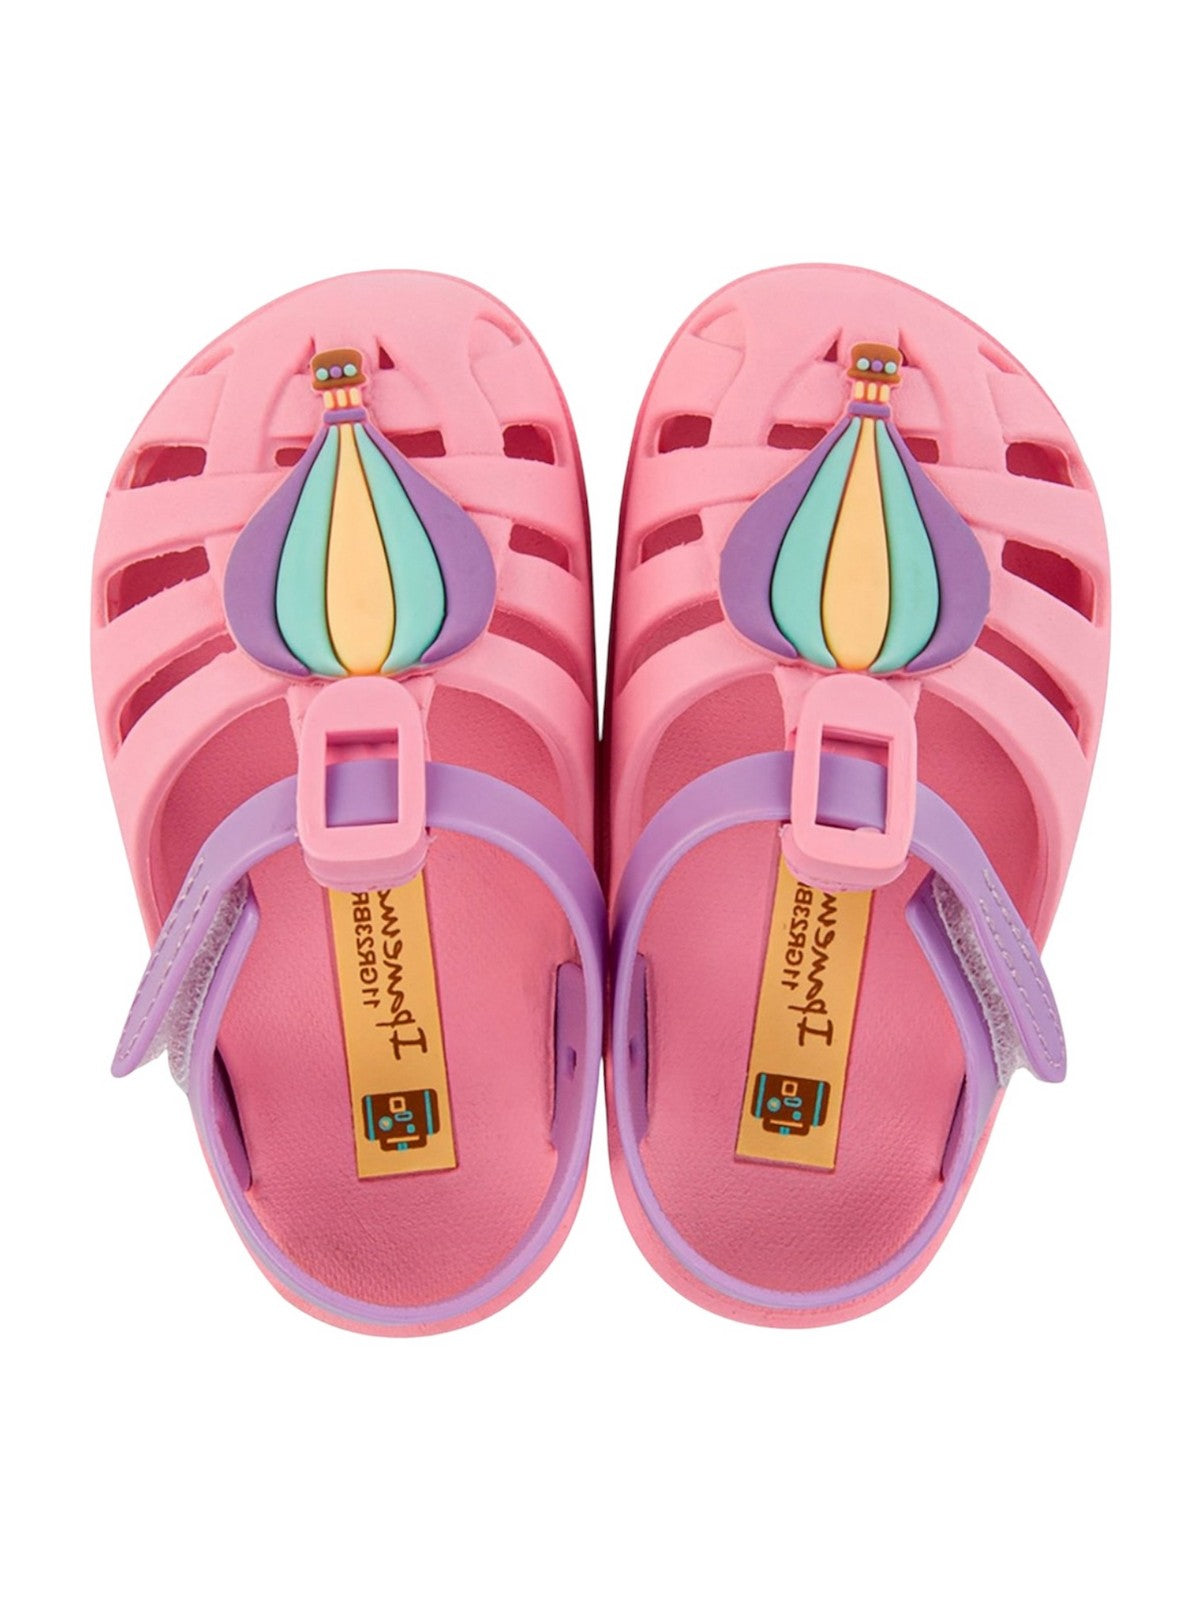 IPANEMA Sandales pour filles et Ipanema Summer Xii Baby IP.83485 AR576 Pink